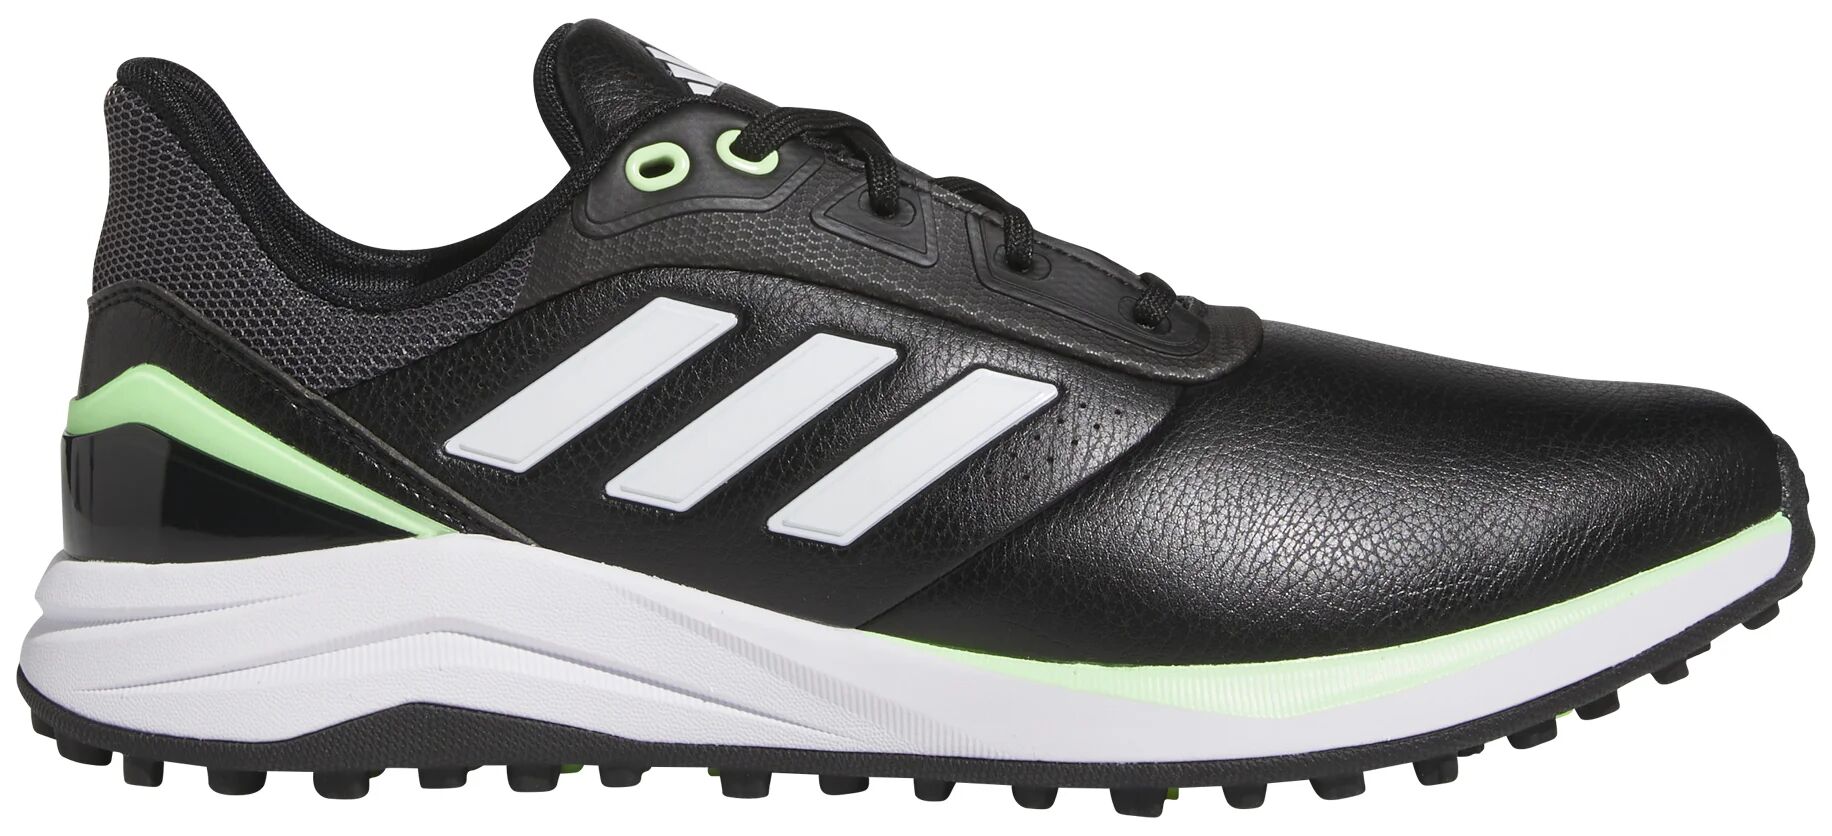 adidas Solarmotion Spikeless 24 Golf Shoes - Core Black/Cloud White/Green Spark - 8 - WIDE